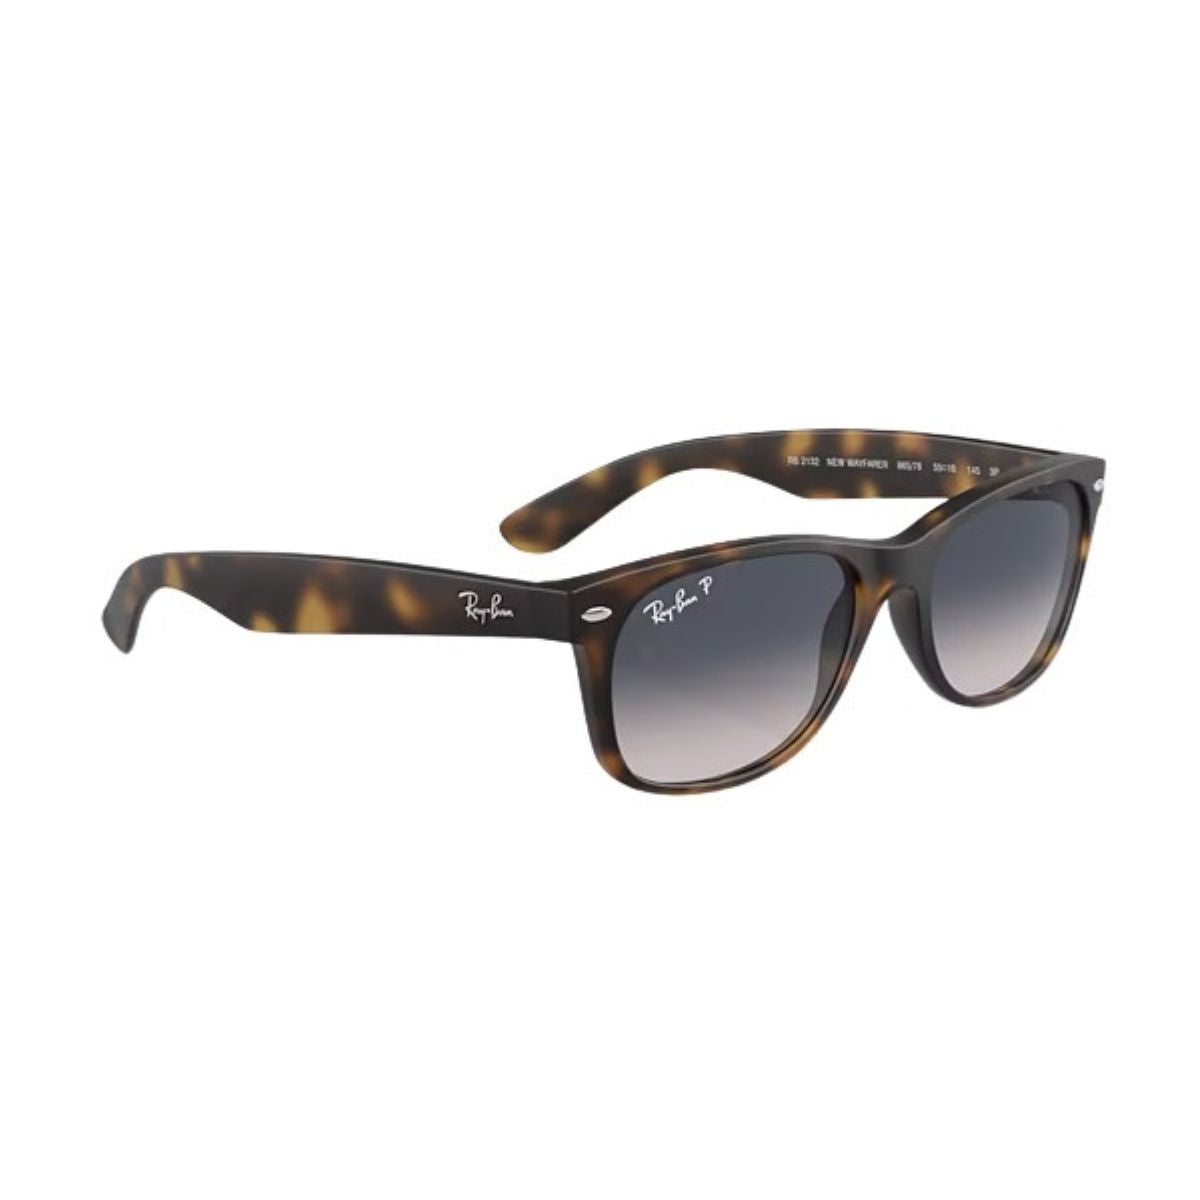 "Shop Ray Ban 2132 865/78 Stylish Sunglass For men And Women At Optorium"